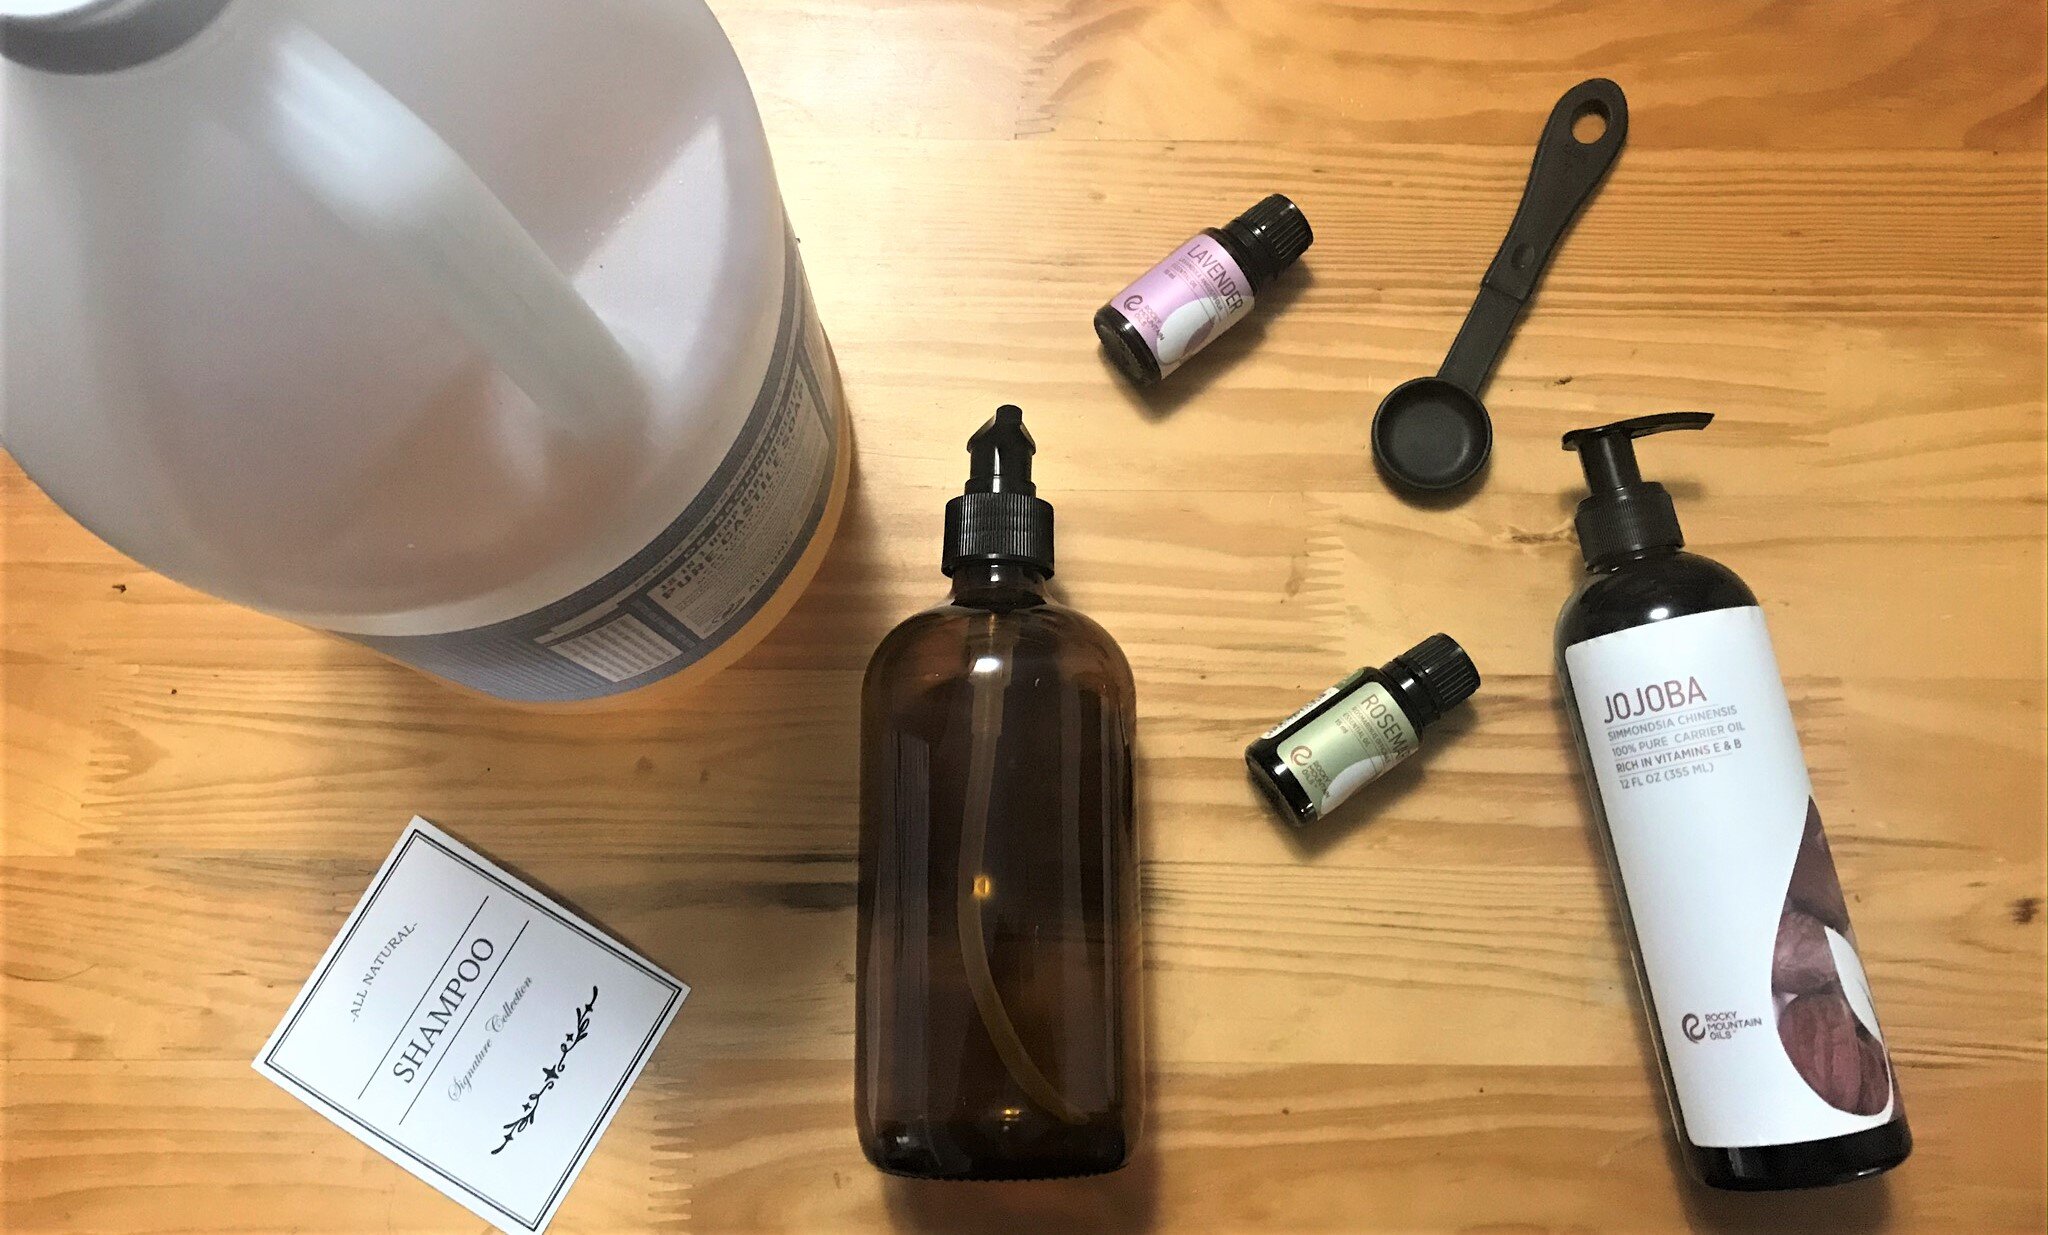 Making homemade shampoo only takes 10 minutes or less. All you need is liquid castile soap, jojoba oil, water, and your favorite essential oils. I like to use rosemary and lavender for hair growth and ultimate scalp health.